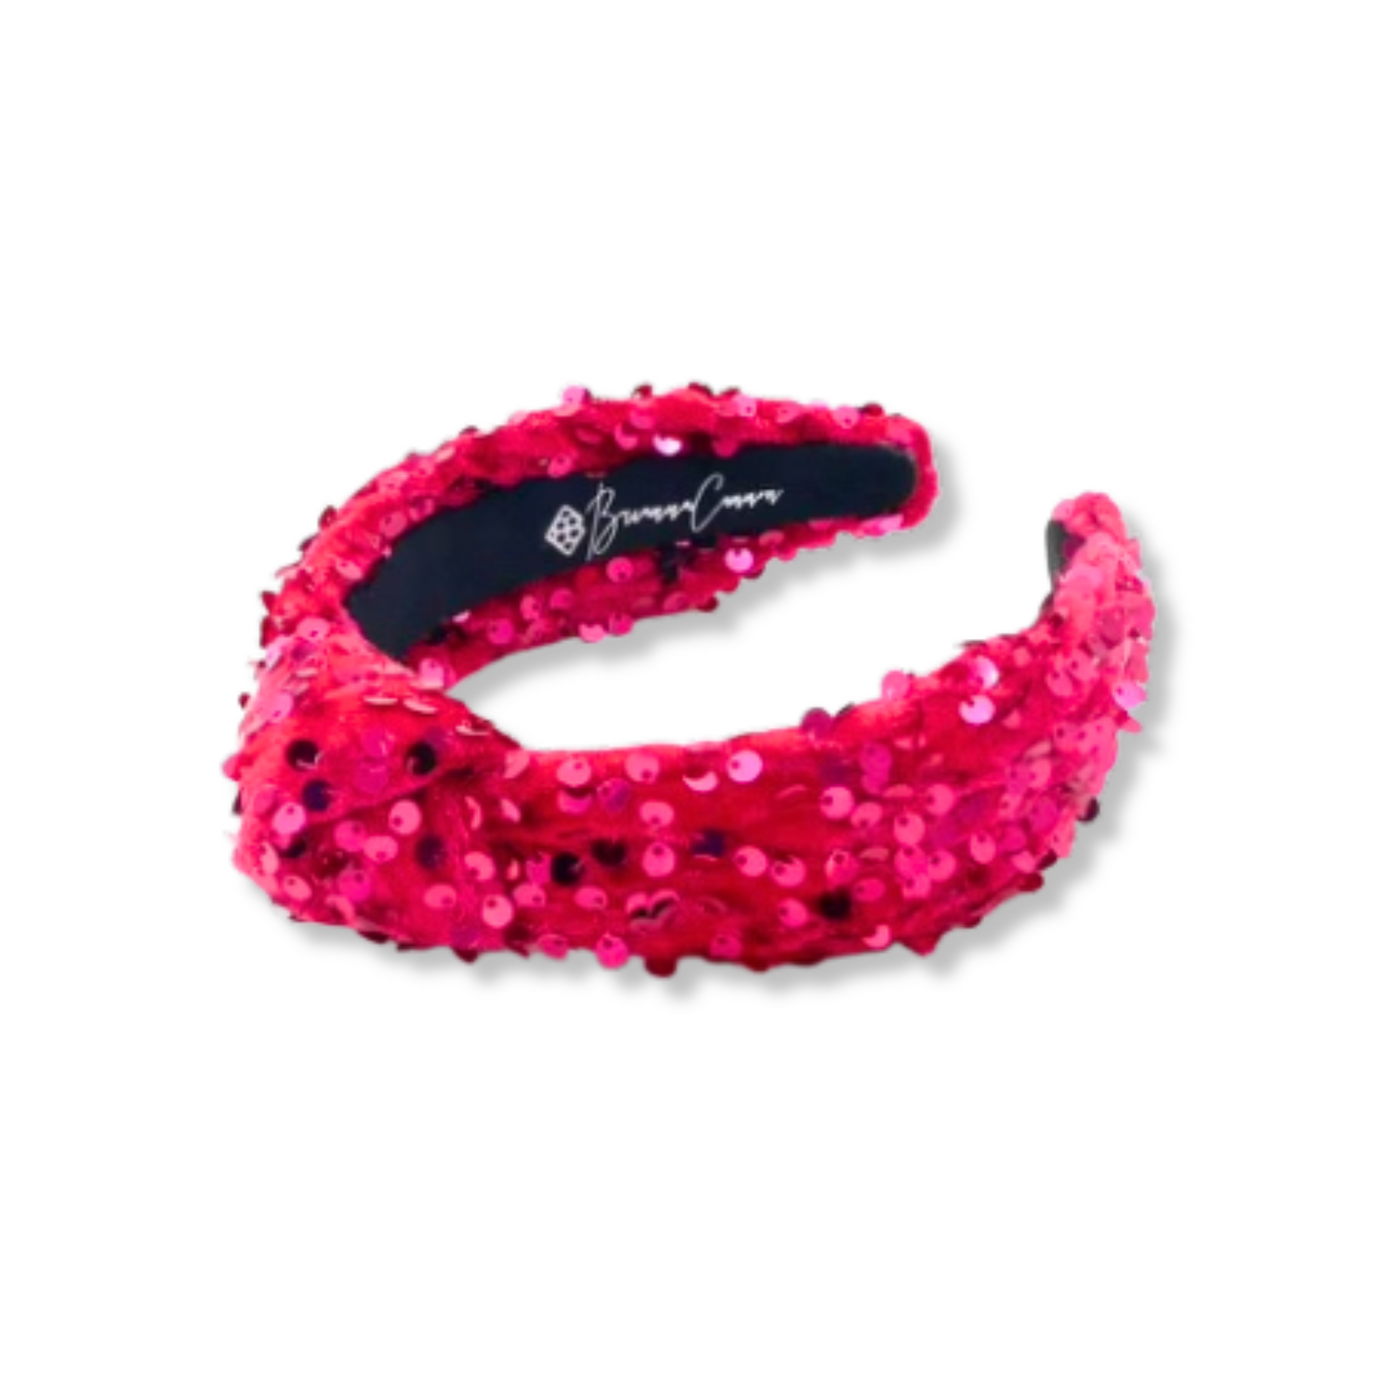 Child Size Pink Sequin Knotted Headband